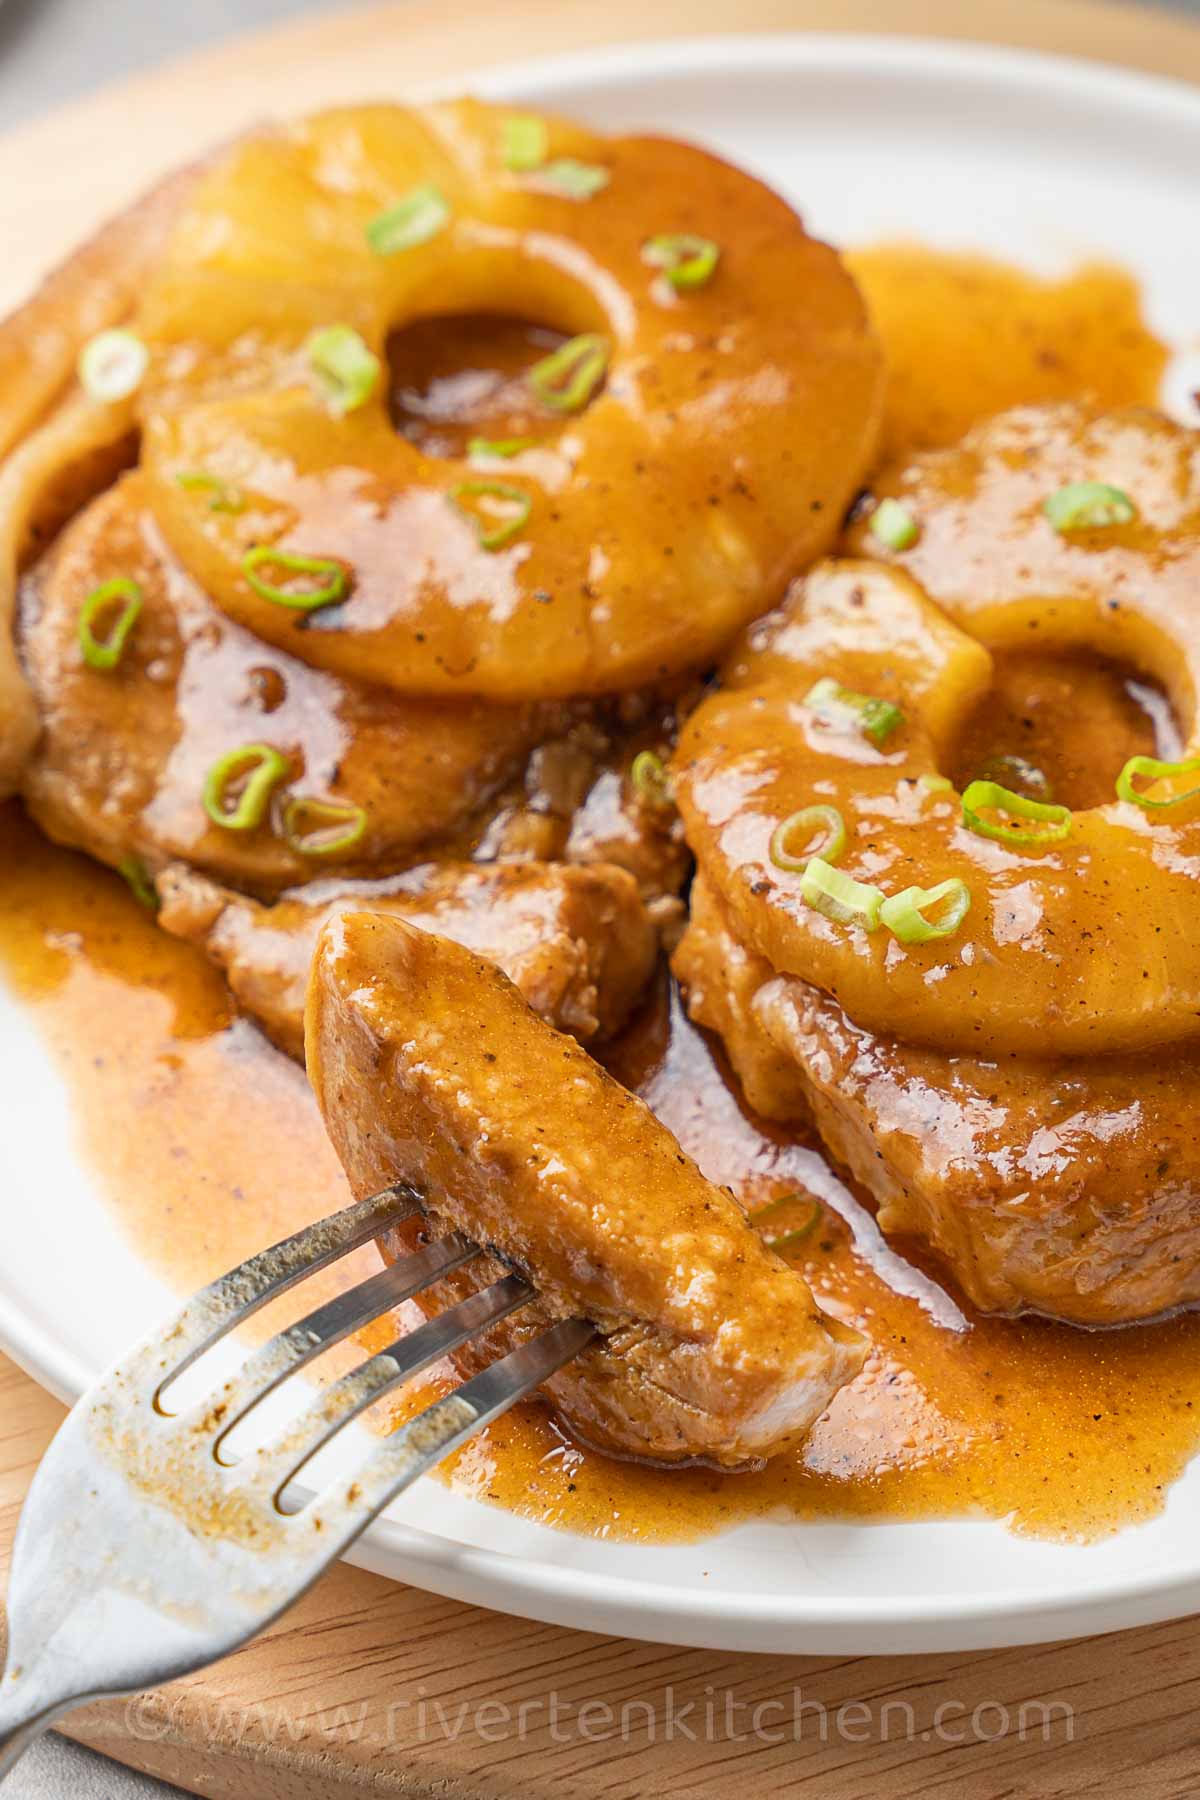 Pork chops with pineapple sauce and pineapple slices cooked in an Instant Pot pressure cooker.